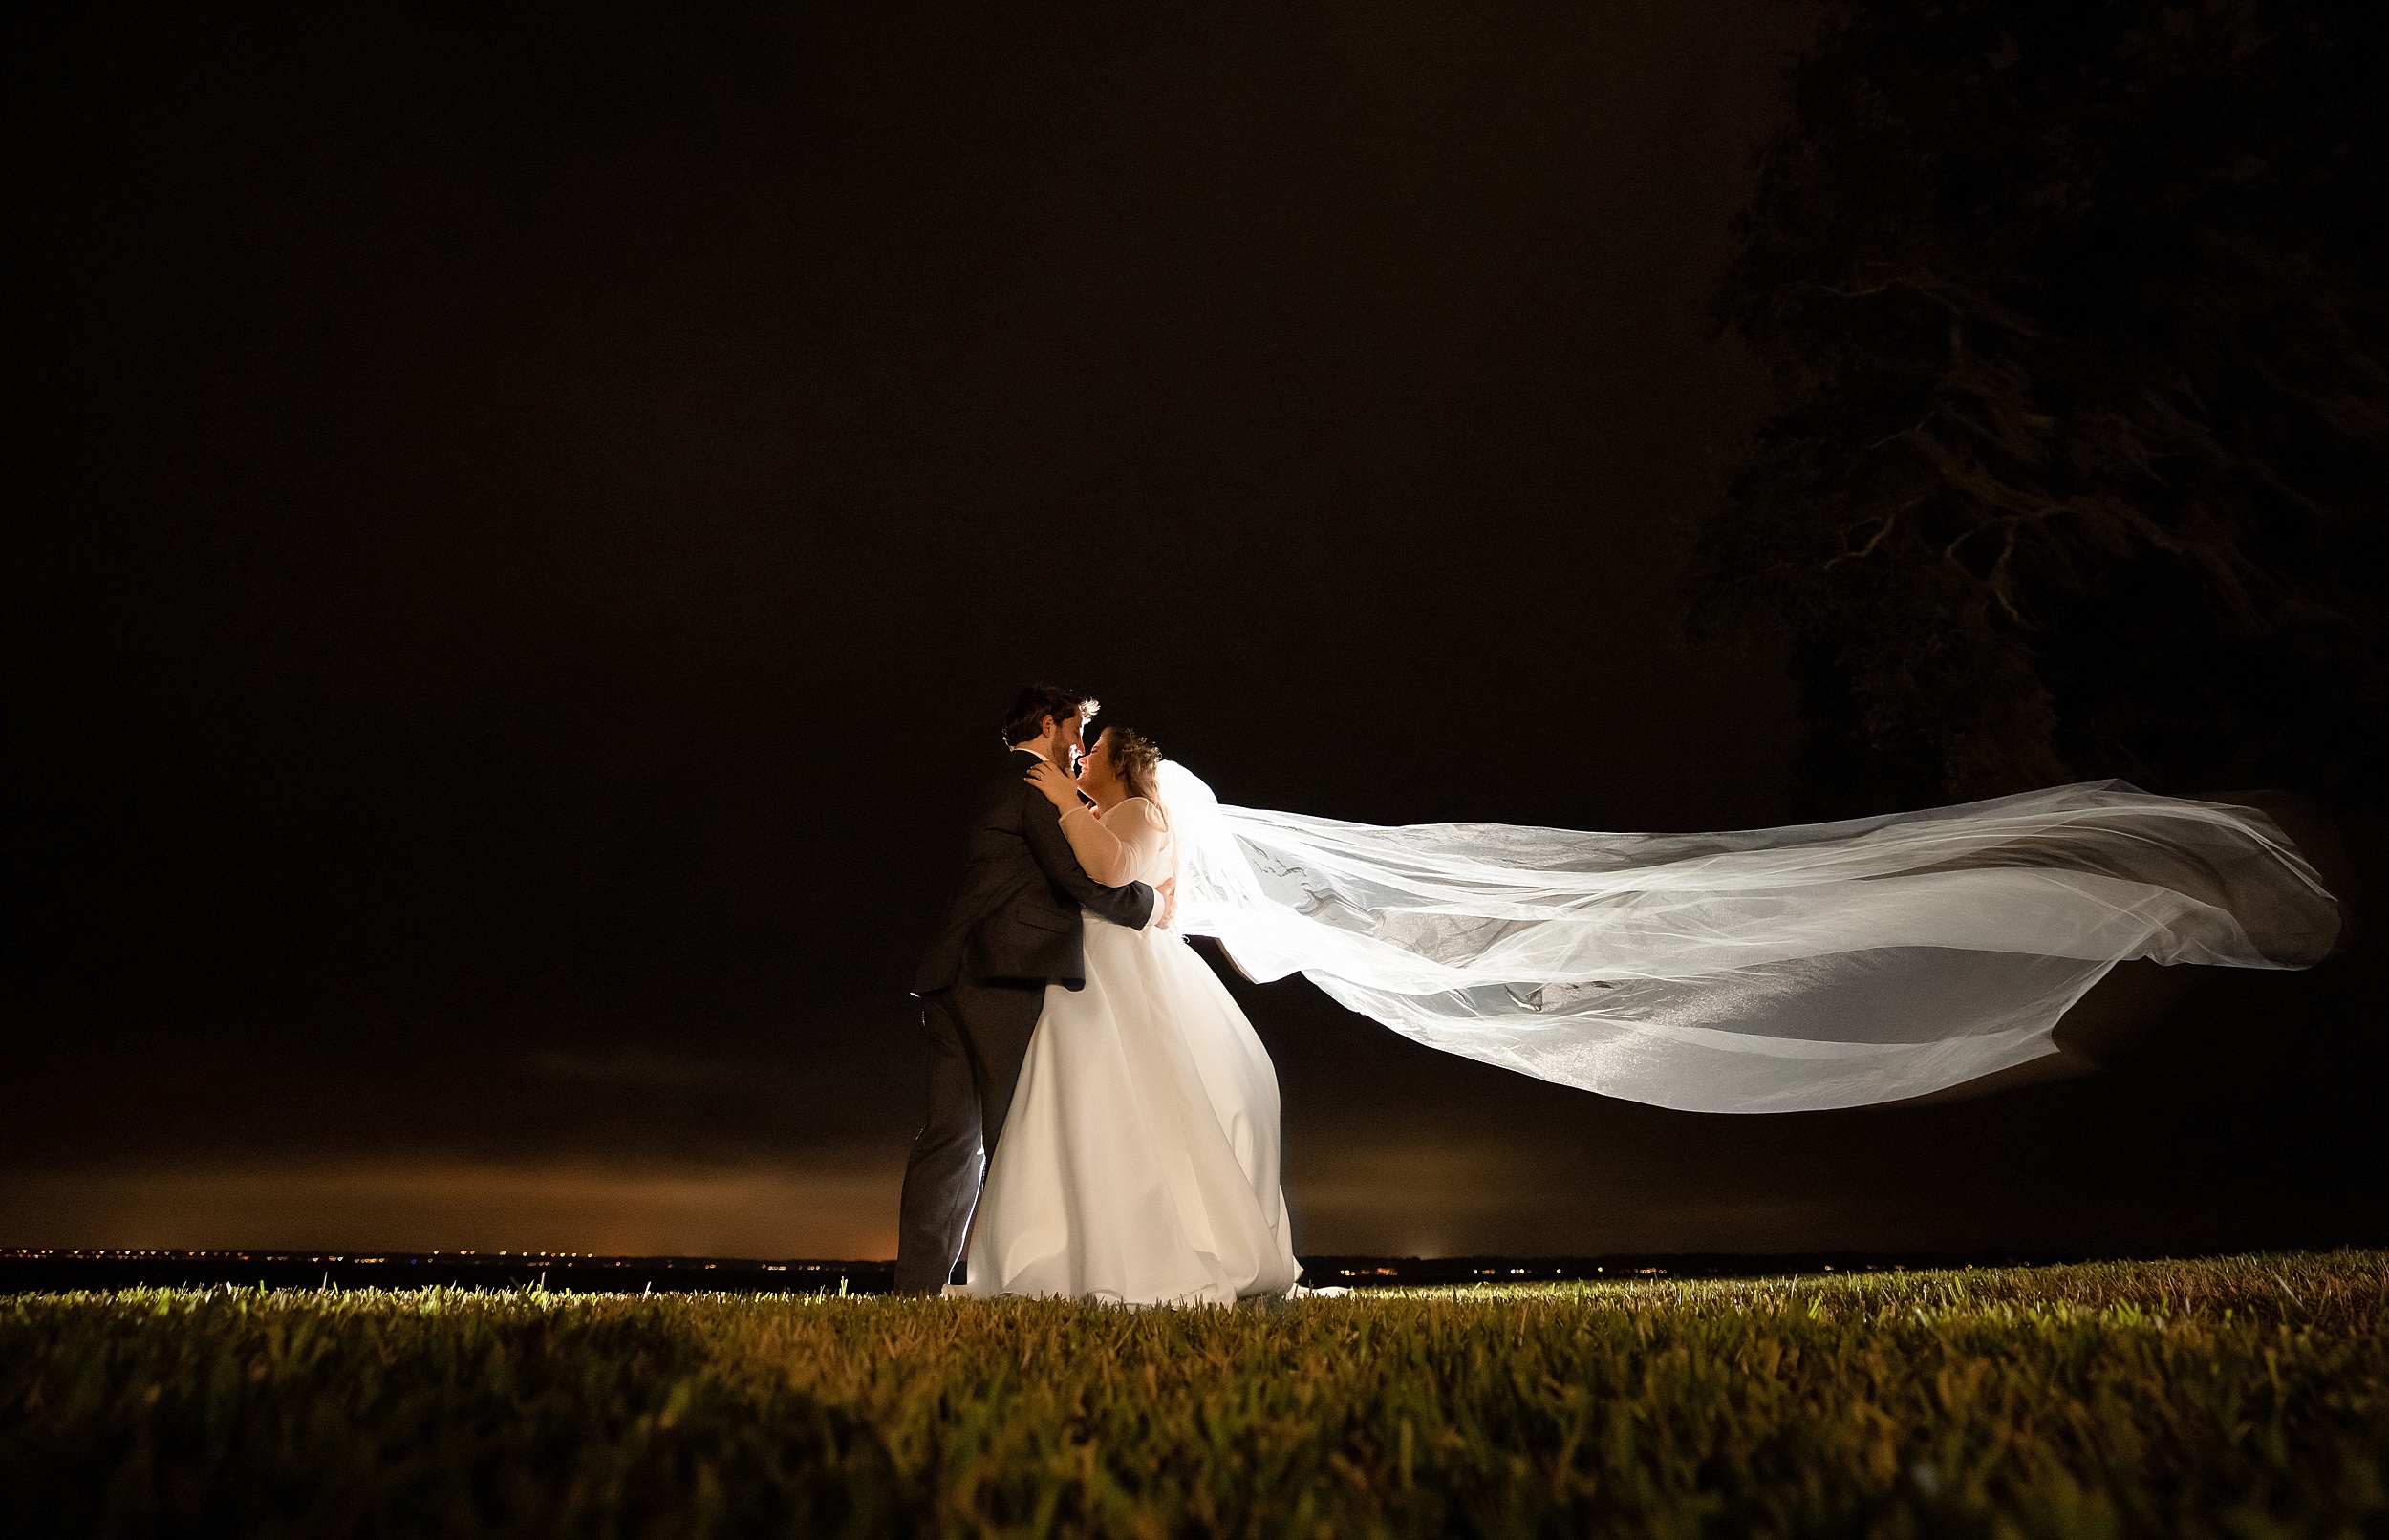 Newlyweds stand on a lawn at night kissing with the veil flowing long behind them in the wind